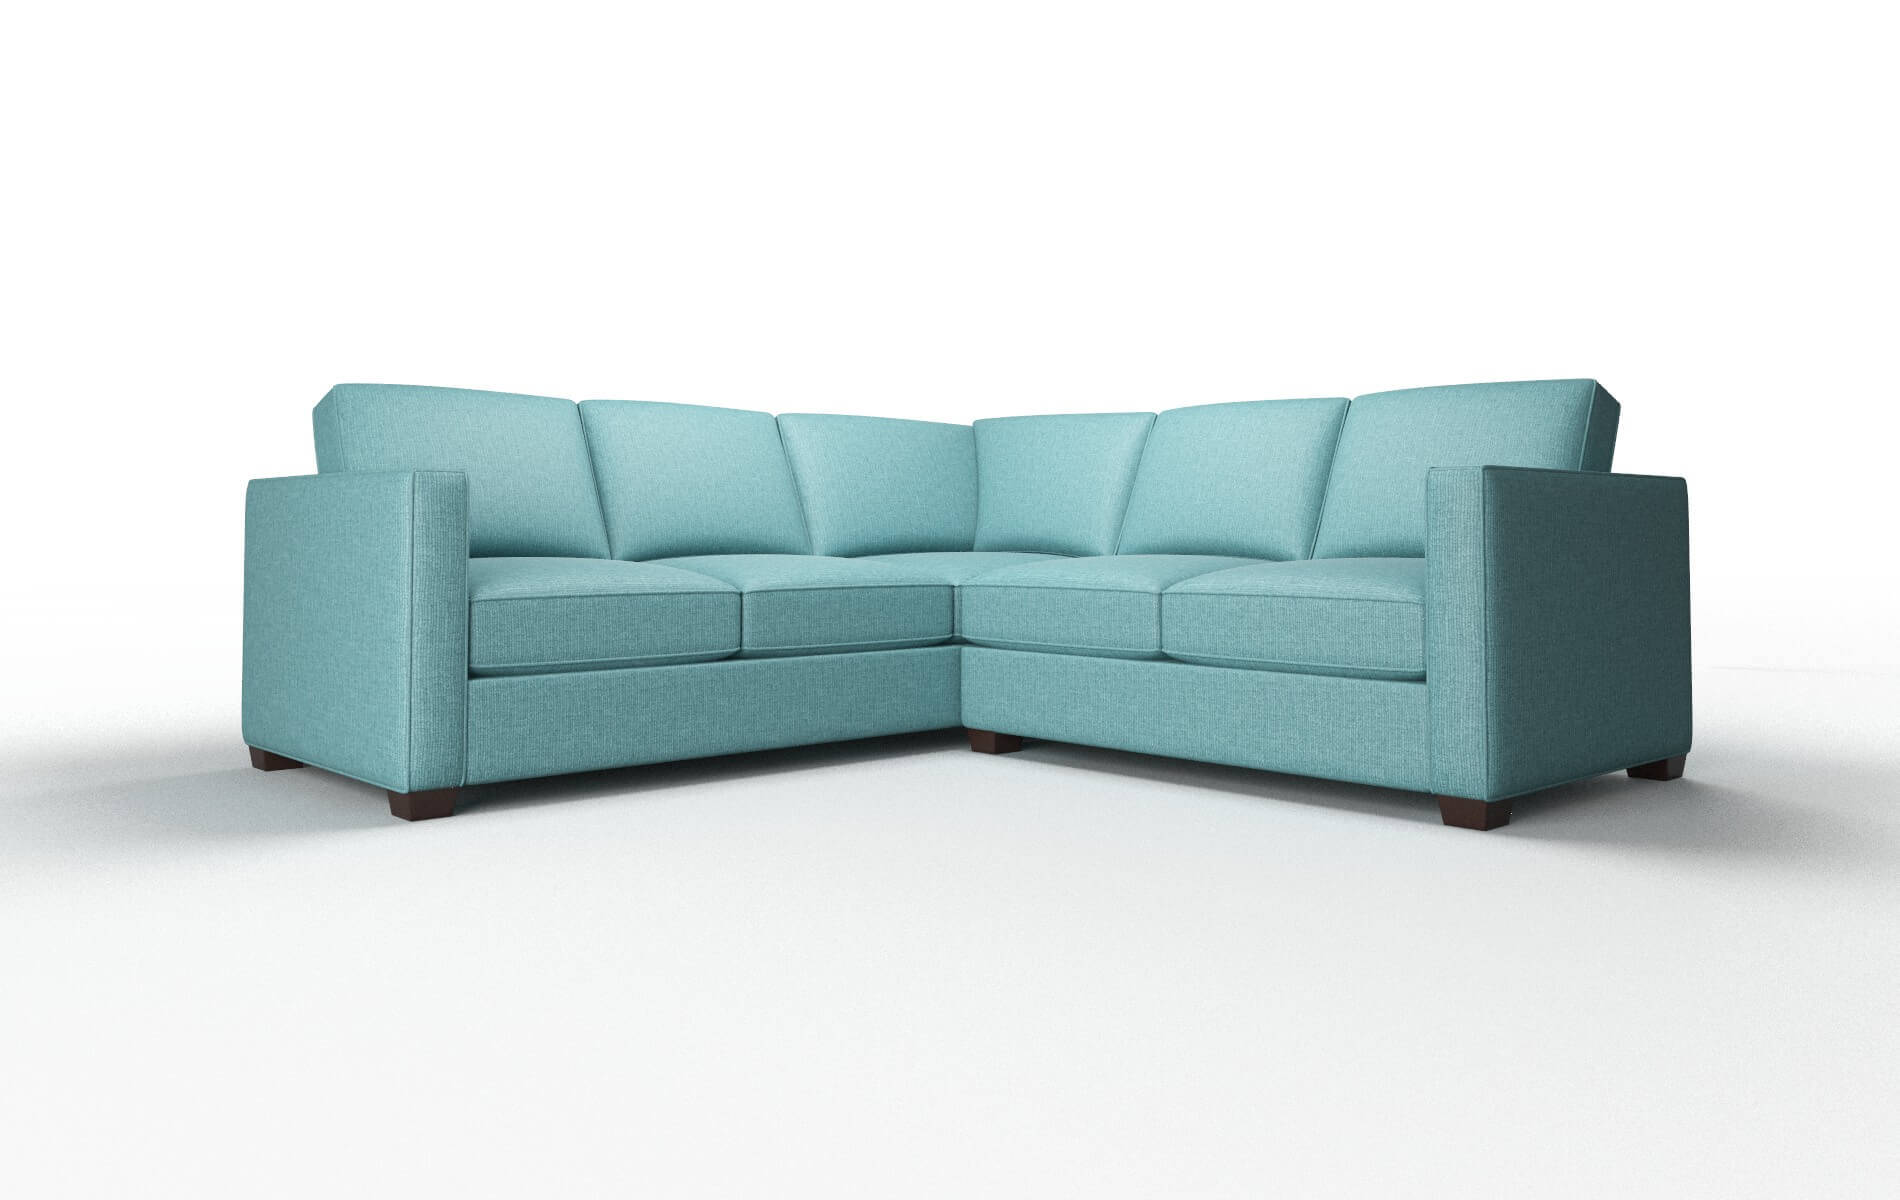 Calgary Parker Turquoise Sectional espresso legs